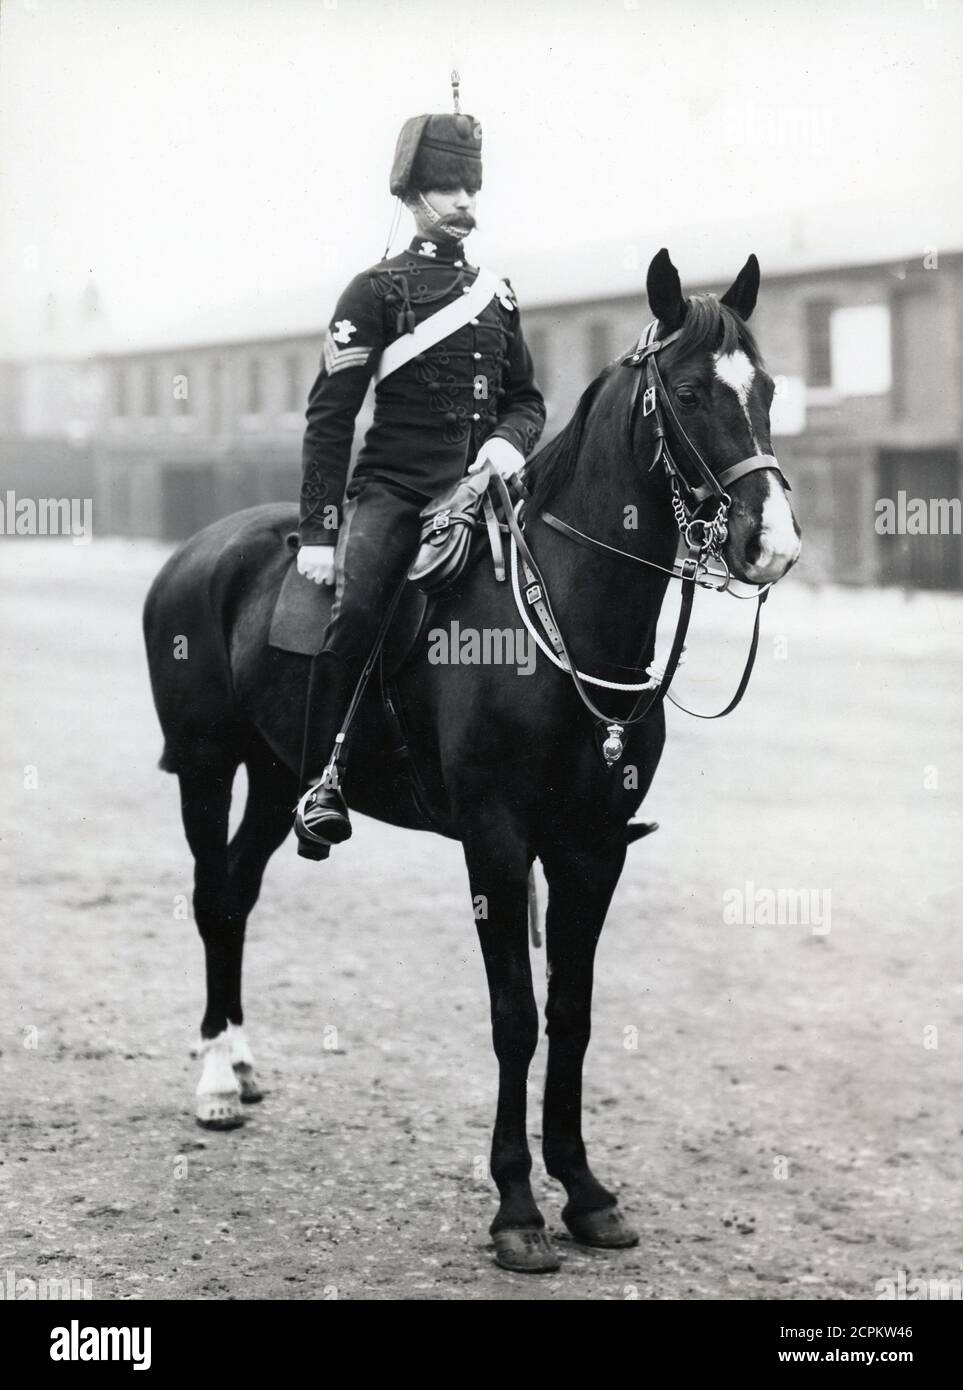 Mounted Cavalry officer. Sergeant in 10th Royal Hussars (Prince of Wales's Own). Taken from an original photograph for the London photographers Larkin Brothers Stock Photo